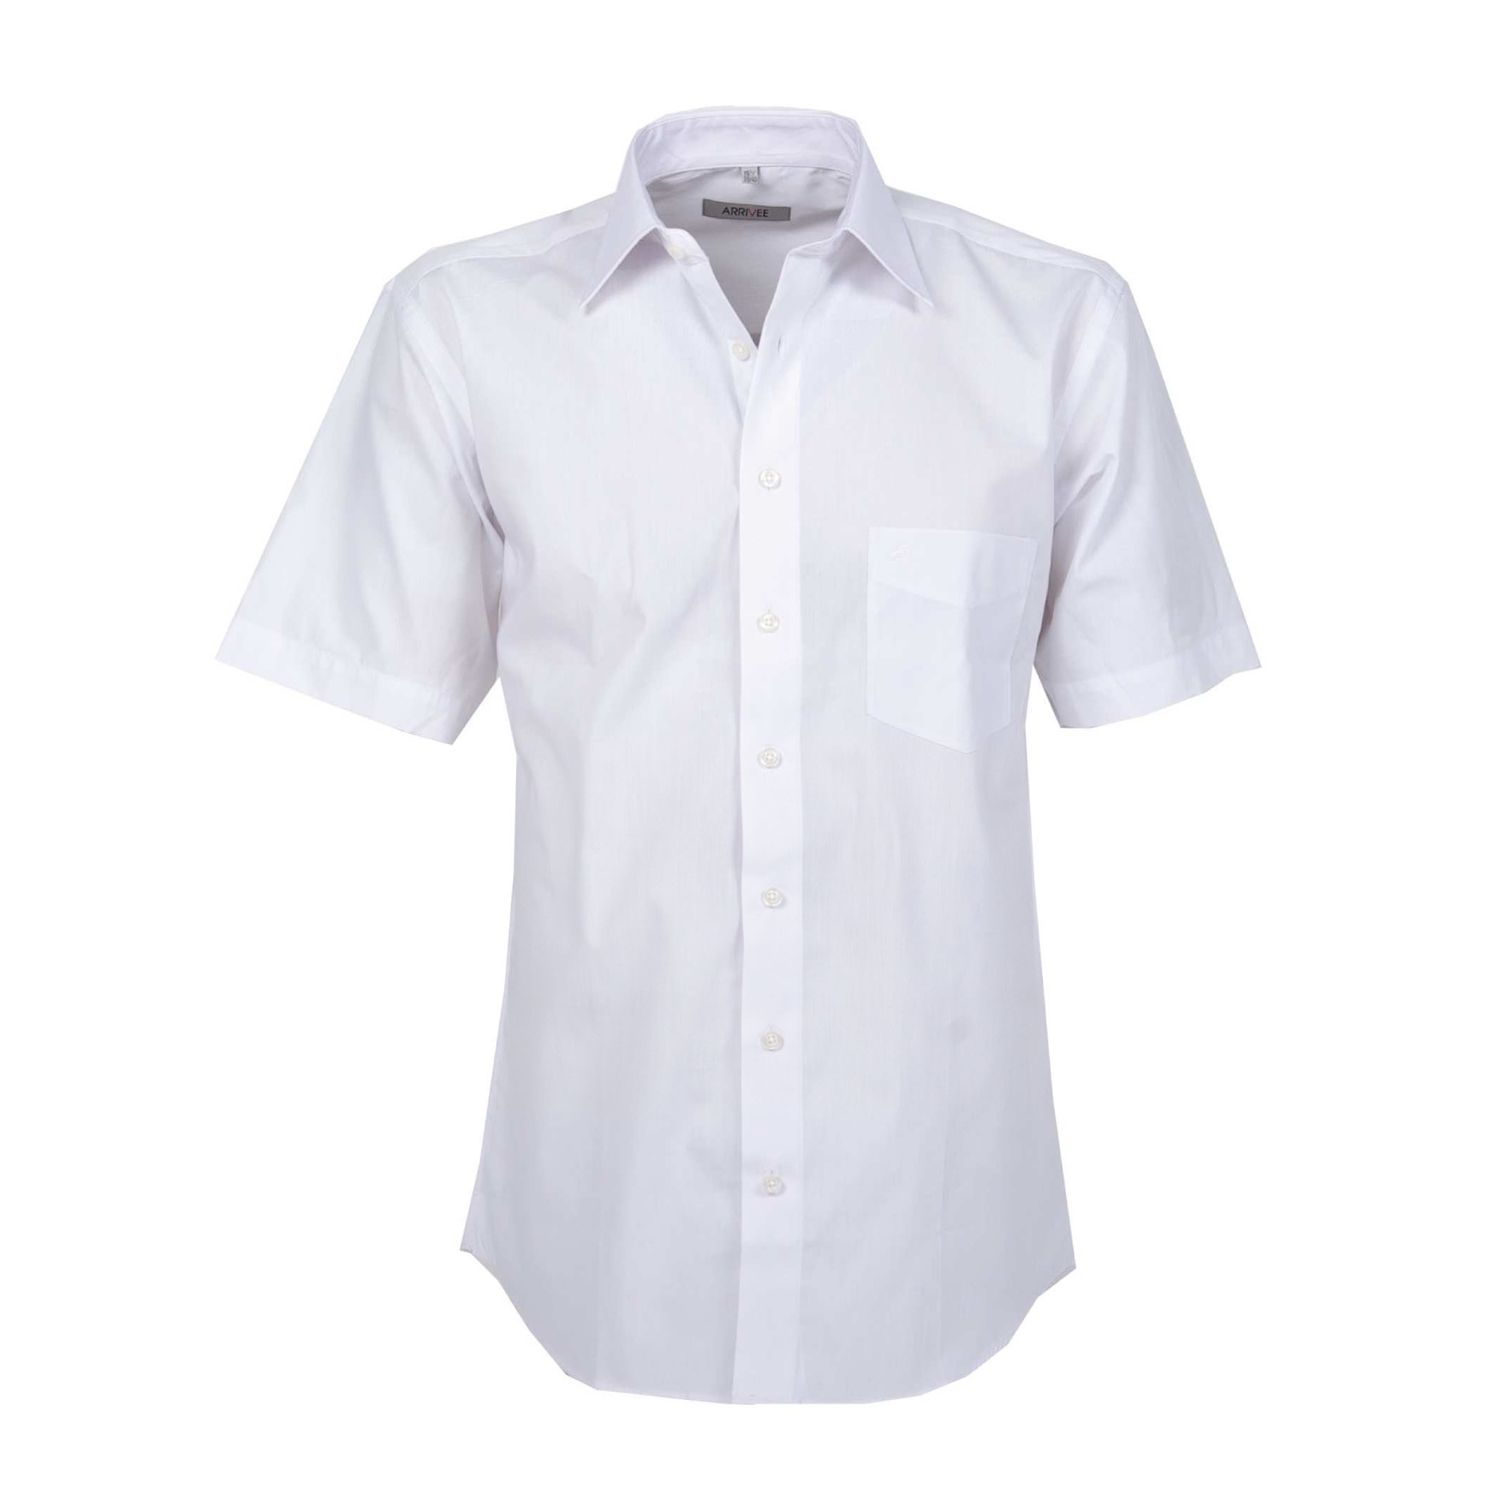 White shirt by ARRIVEE in big sizes XL up to 8XL